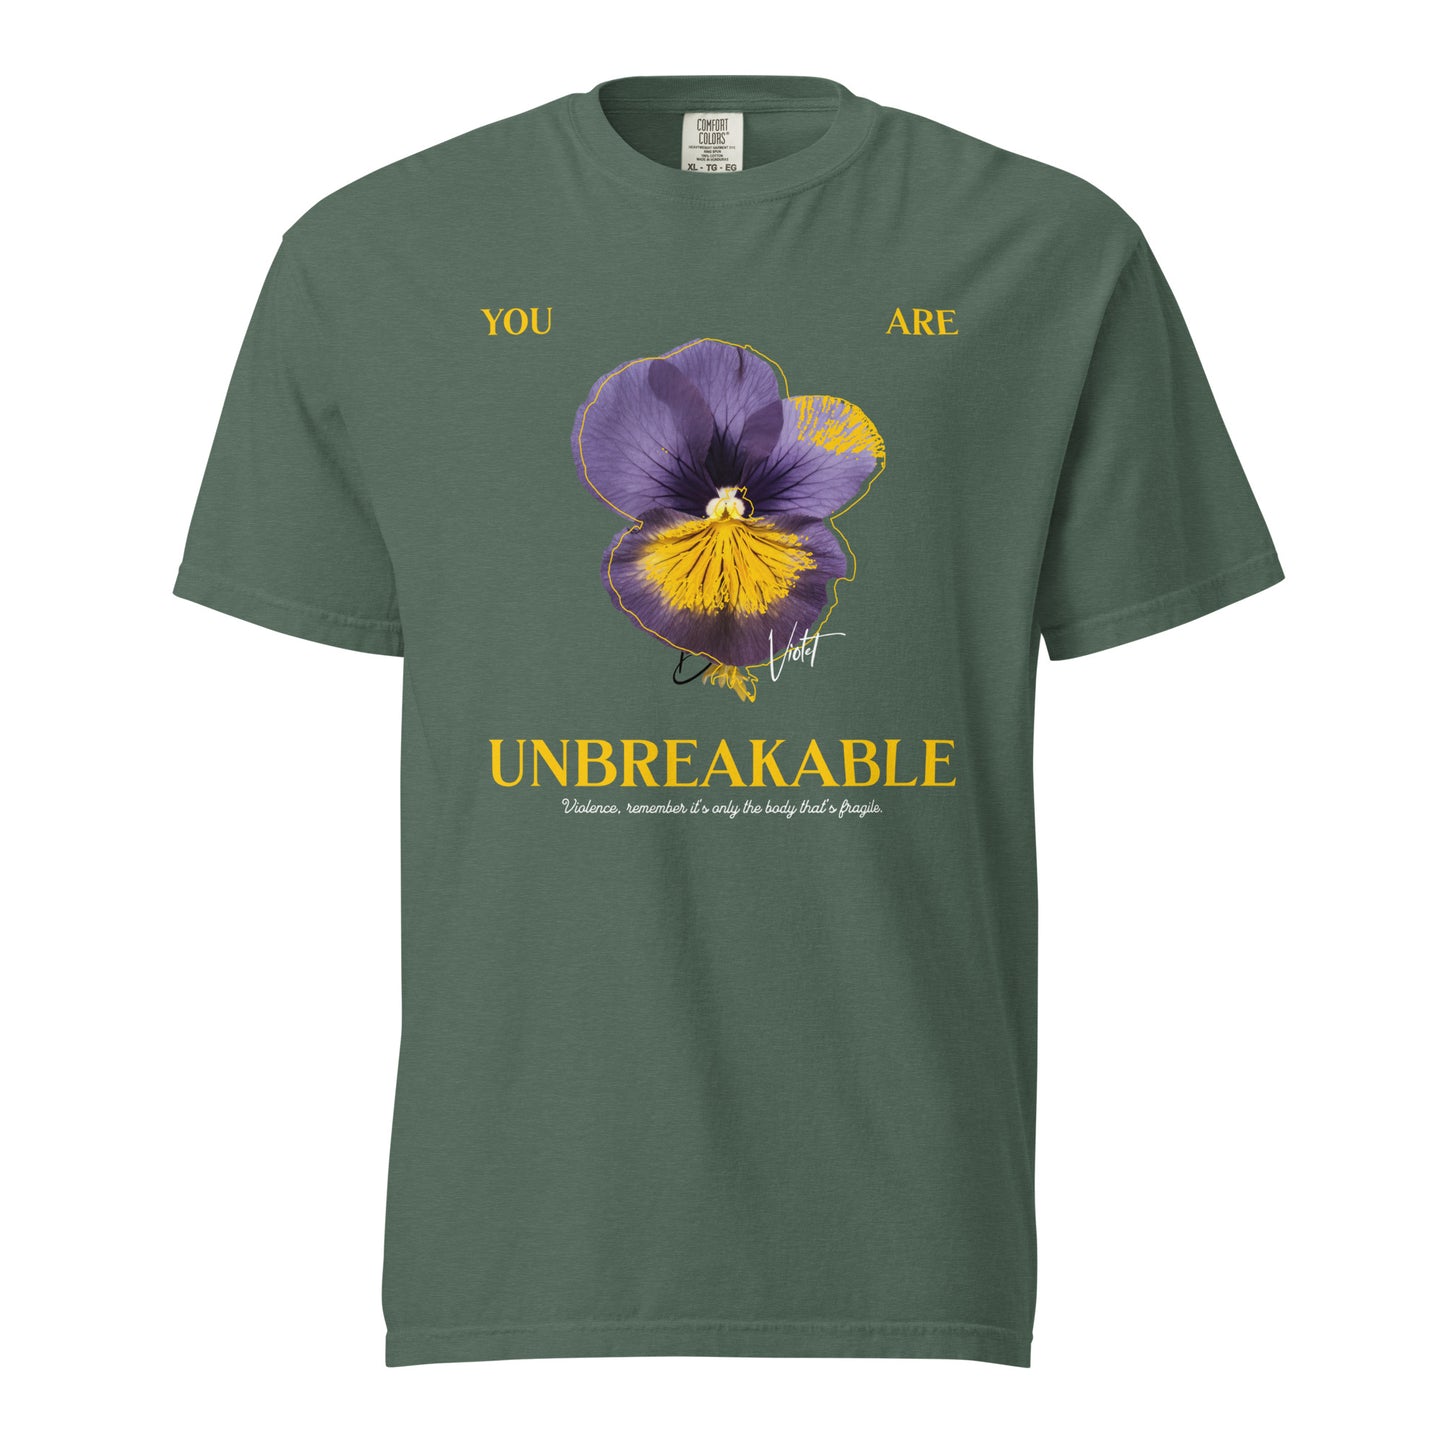 You Are Unbreakable Tee Shirt